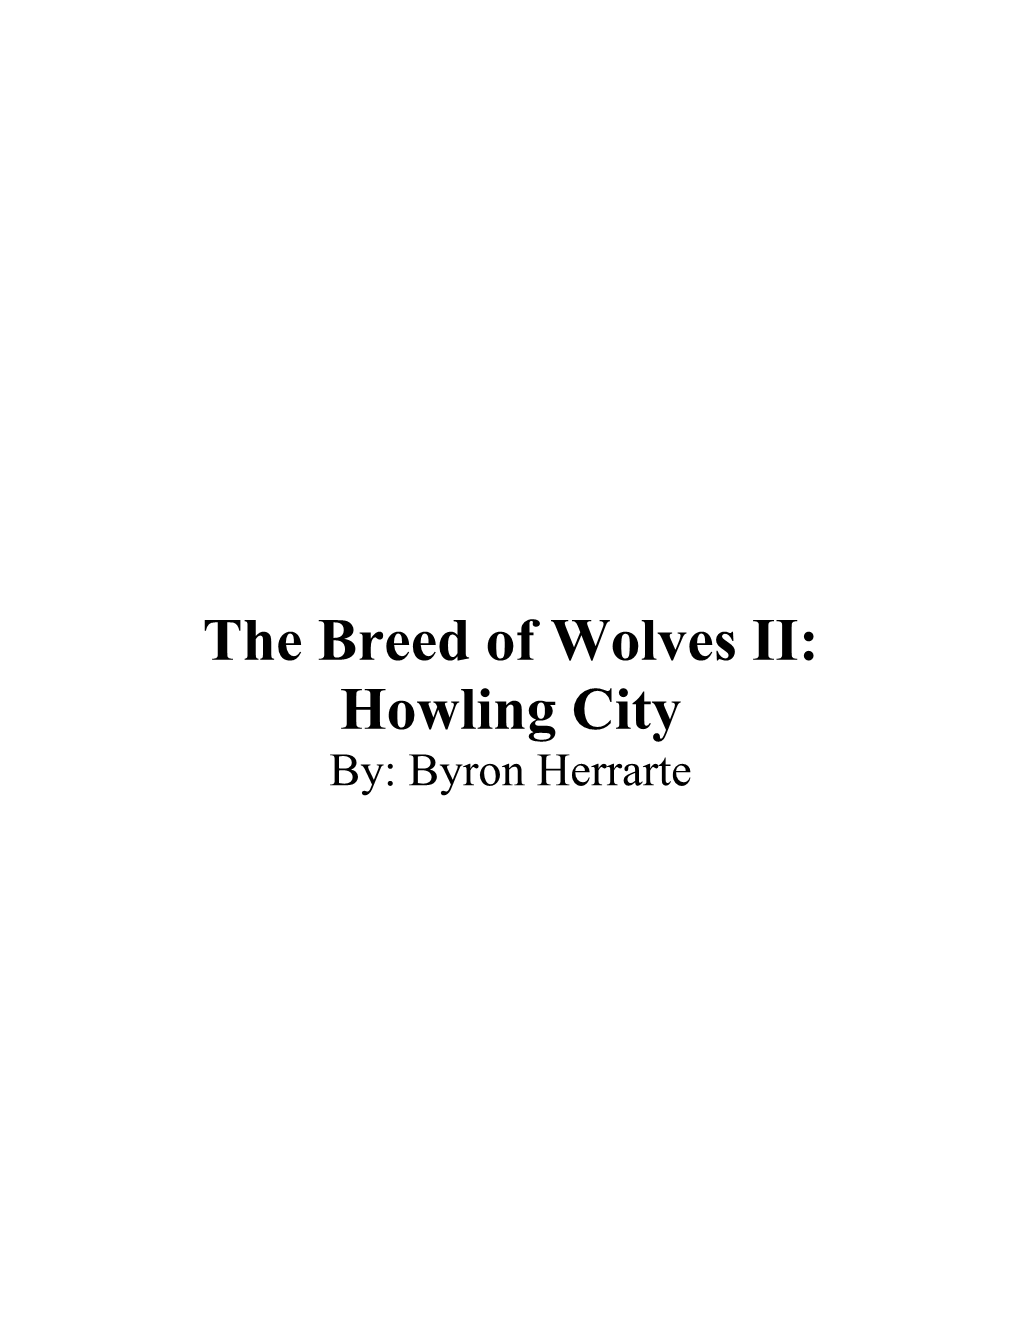 The Breed of Wolves II